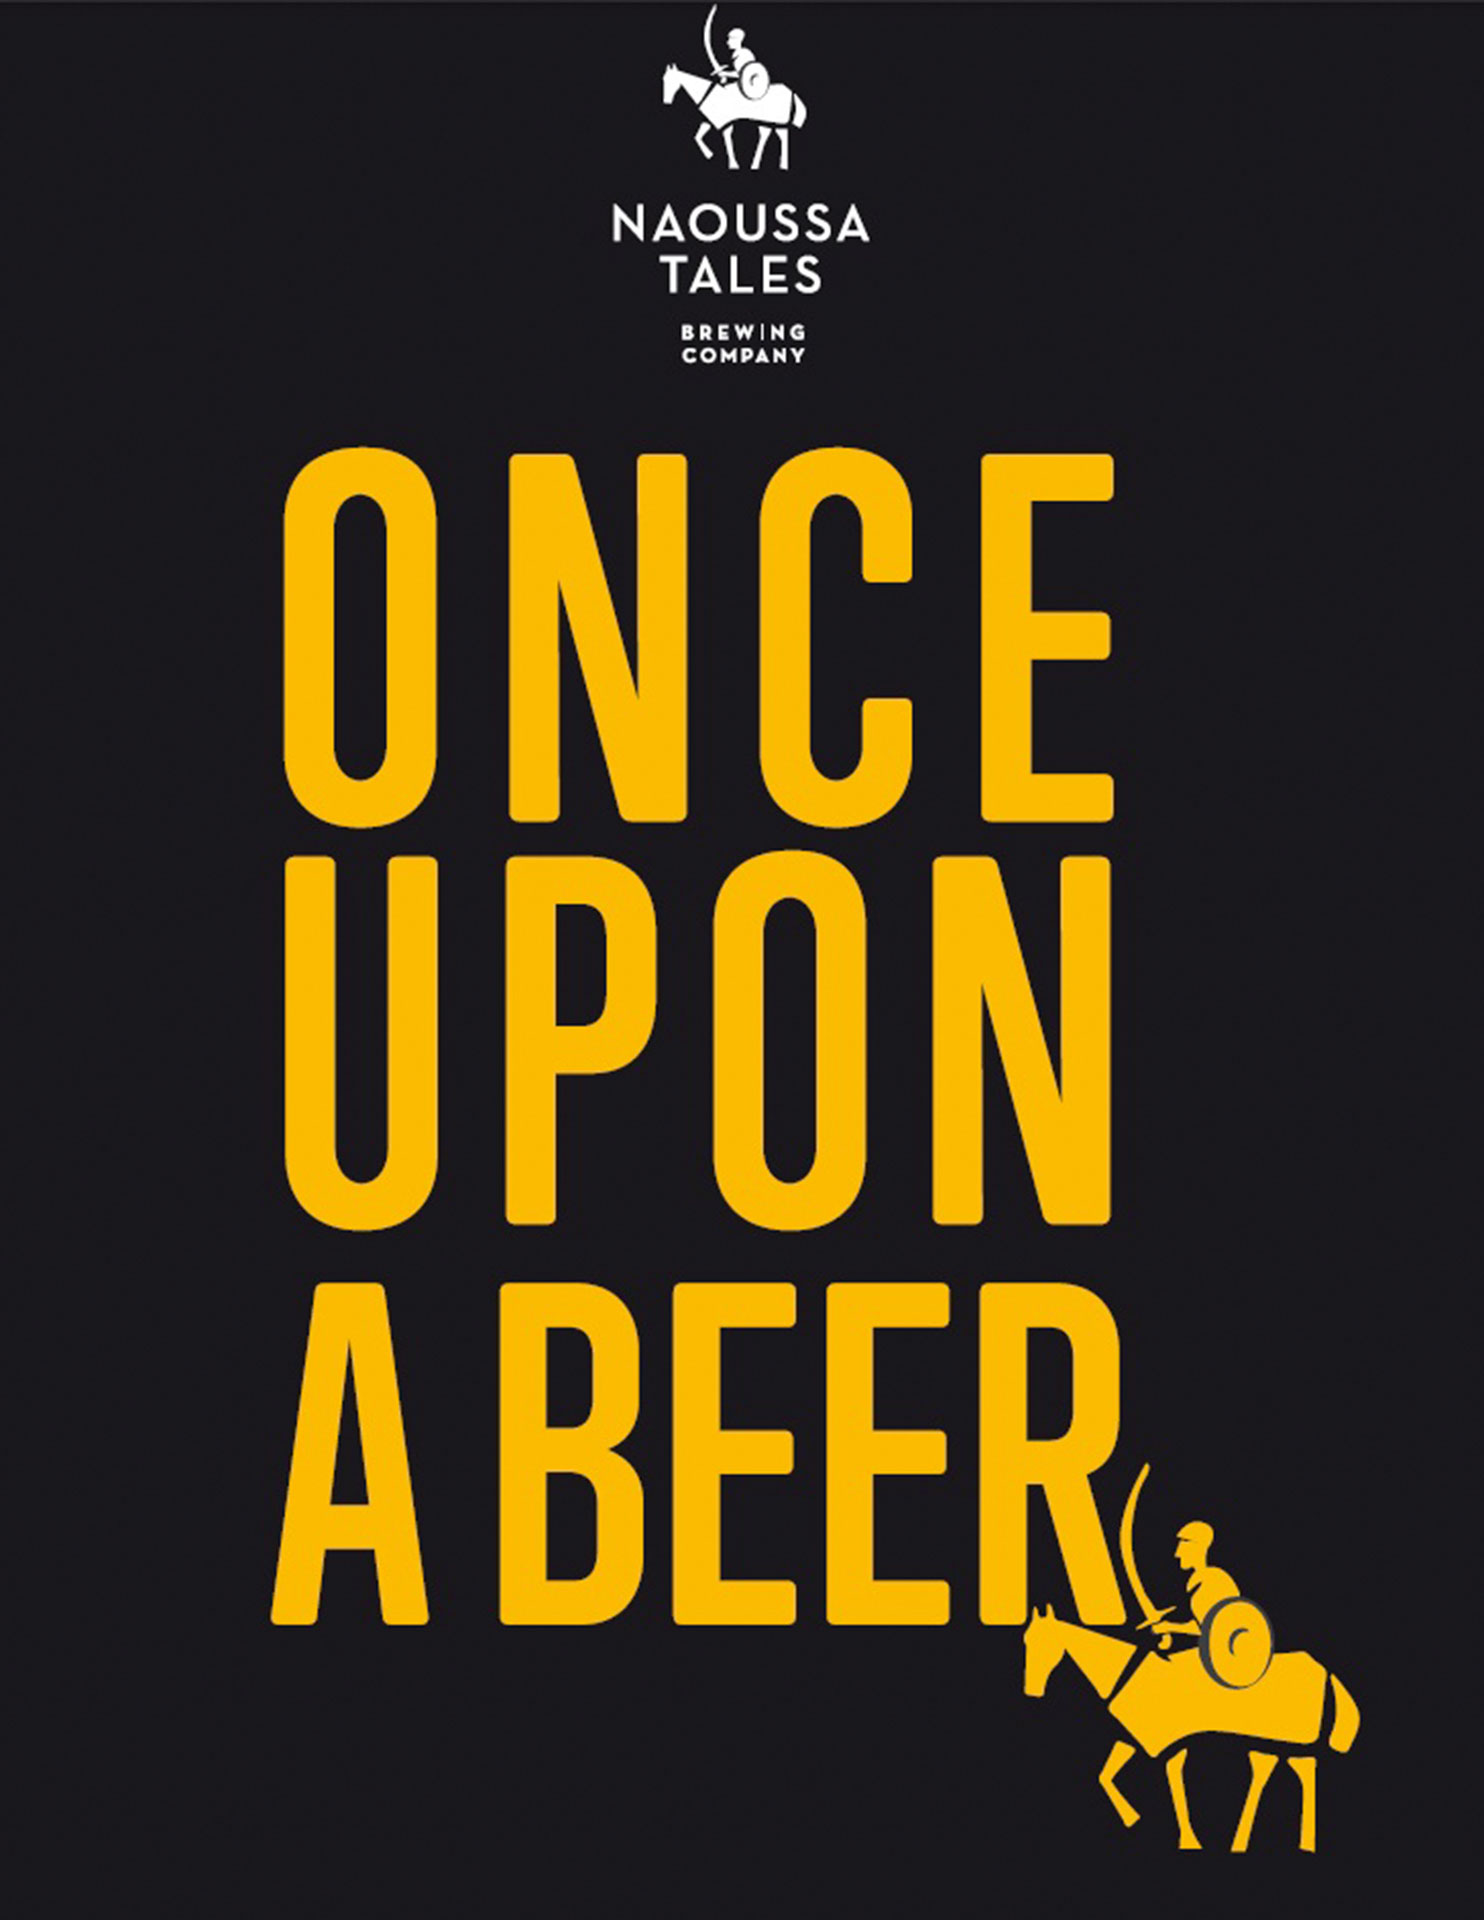 Naoussa Tales Once upon a beer